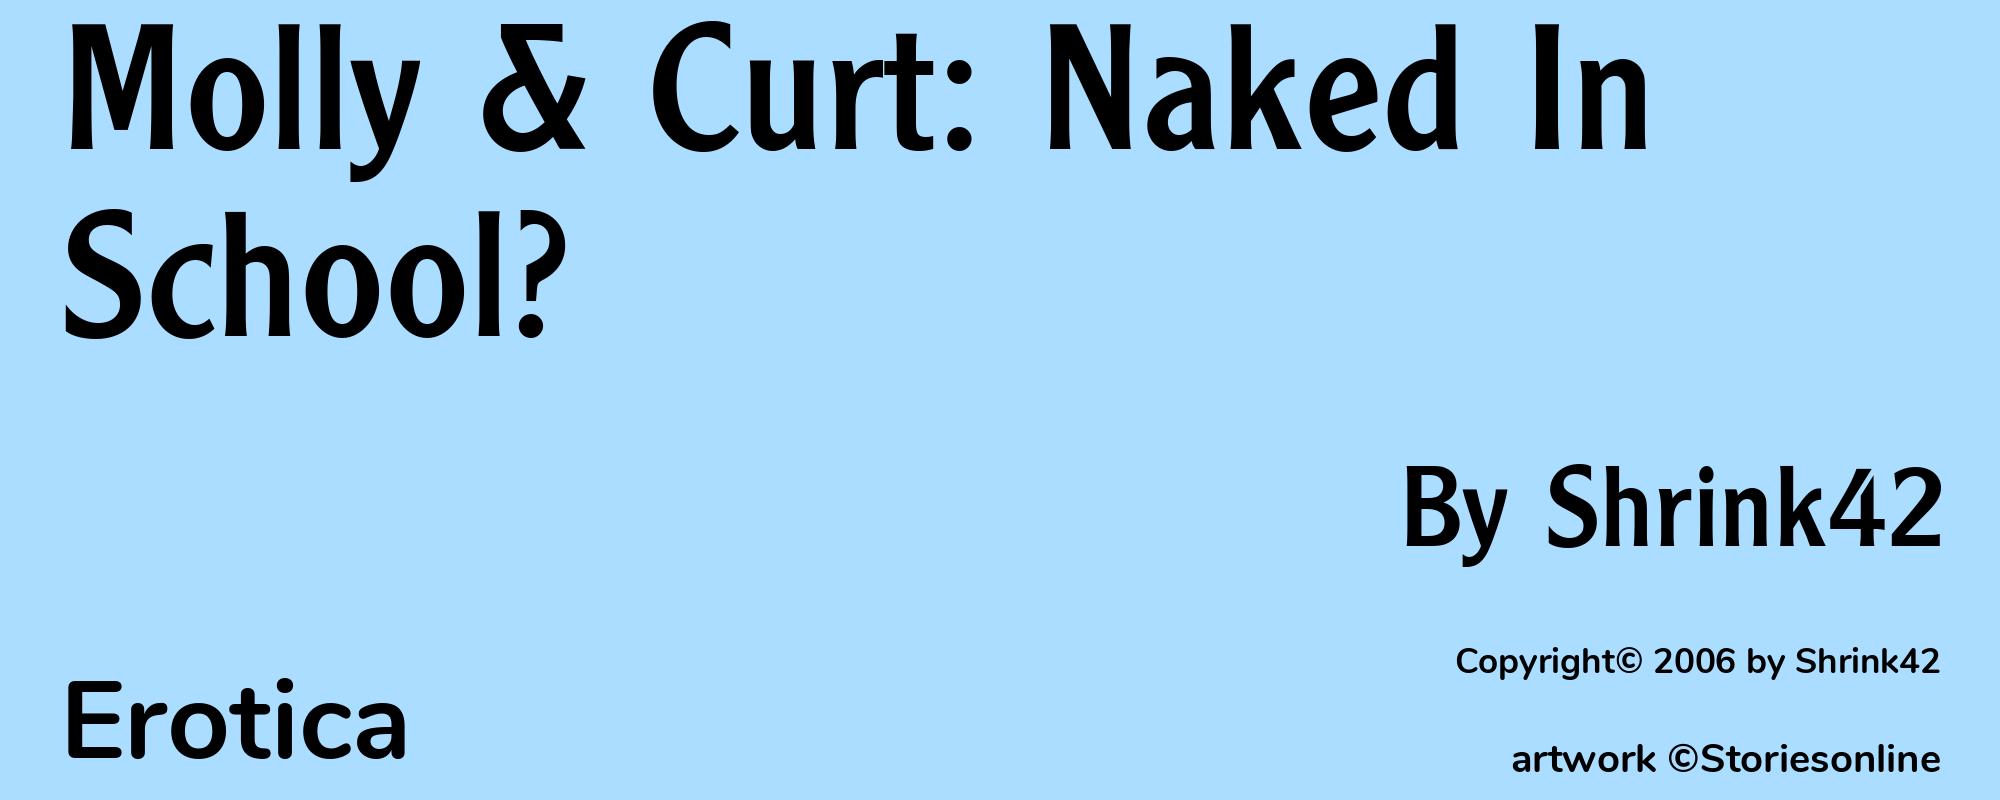 Molly & Curt: Naked In School? - Cover